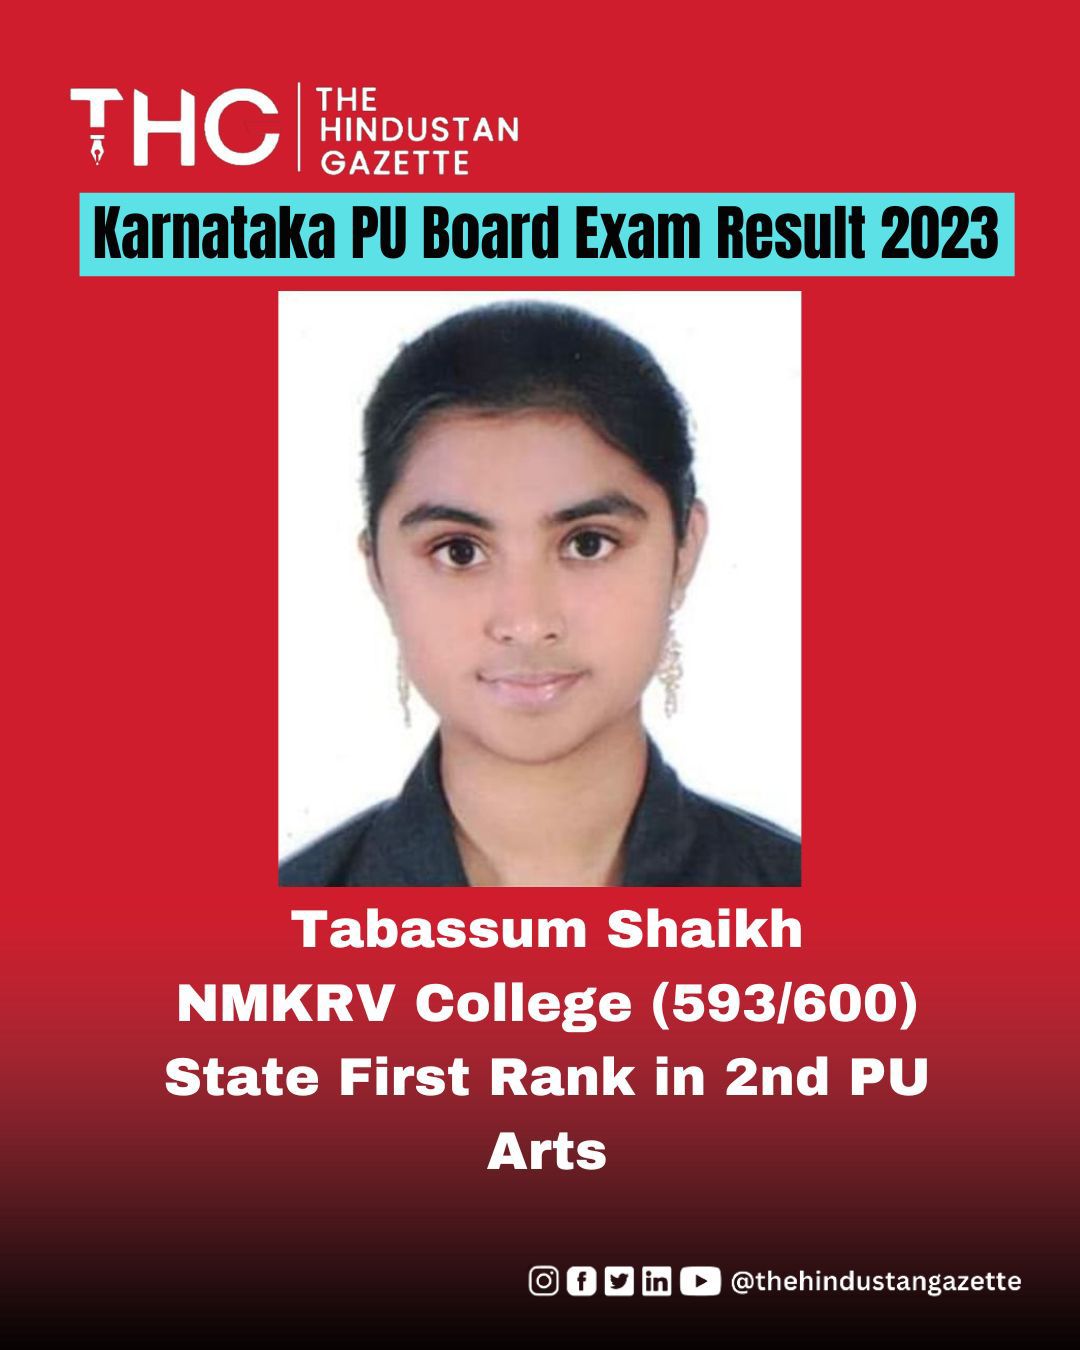 Second PUC Result Tabassum Shaikh secured state rank The Hindustan